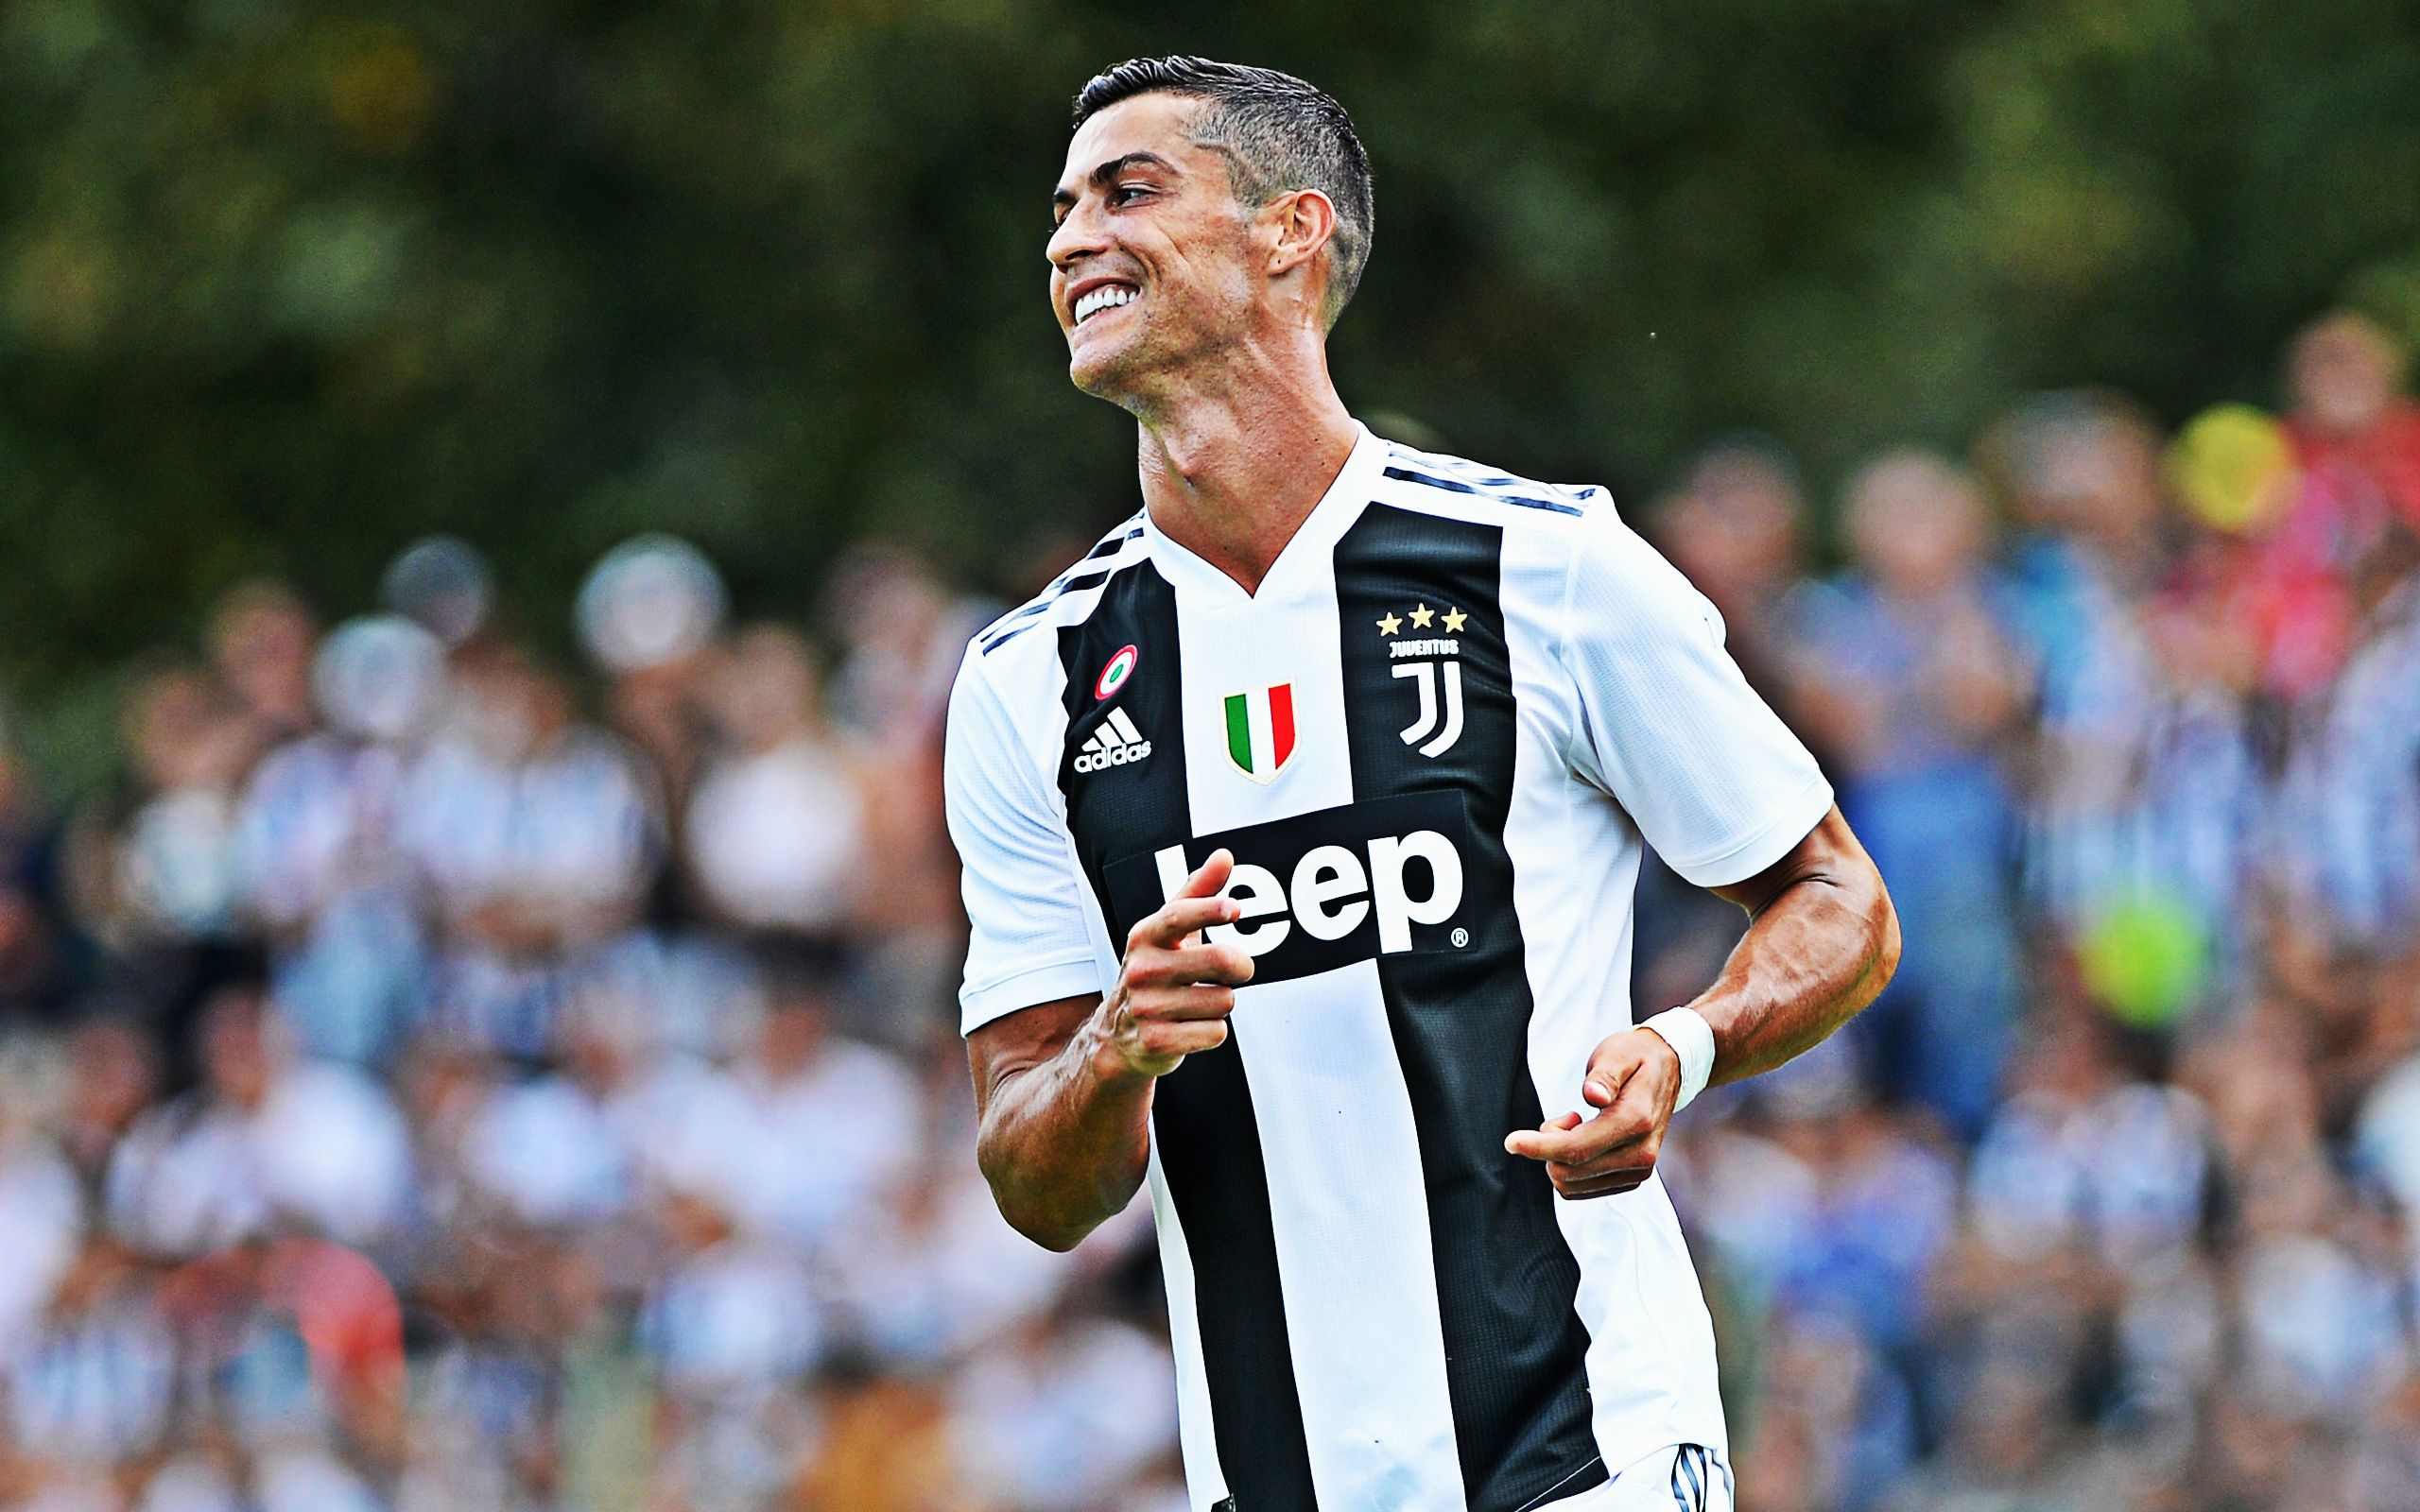 Download wallpaper Cristiano Ronaldo, smile, portrait, Juventus FC, Serie A, Italy, Portuguese footballer, star, football, CR Ronaldo for desktop with resolution 2560x1600. High Quality HD picture wallpaper